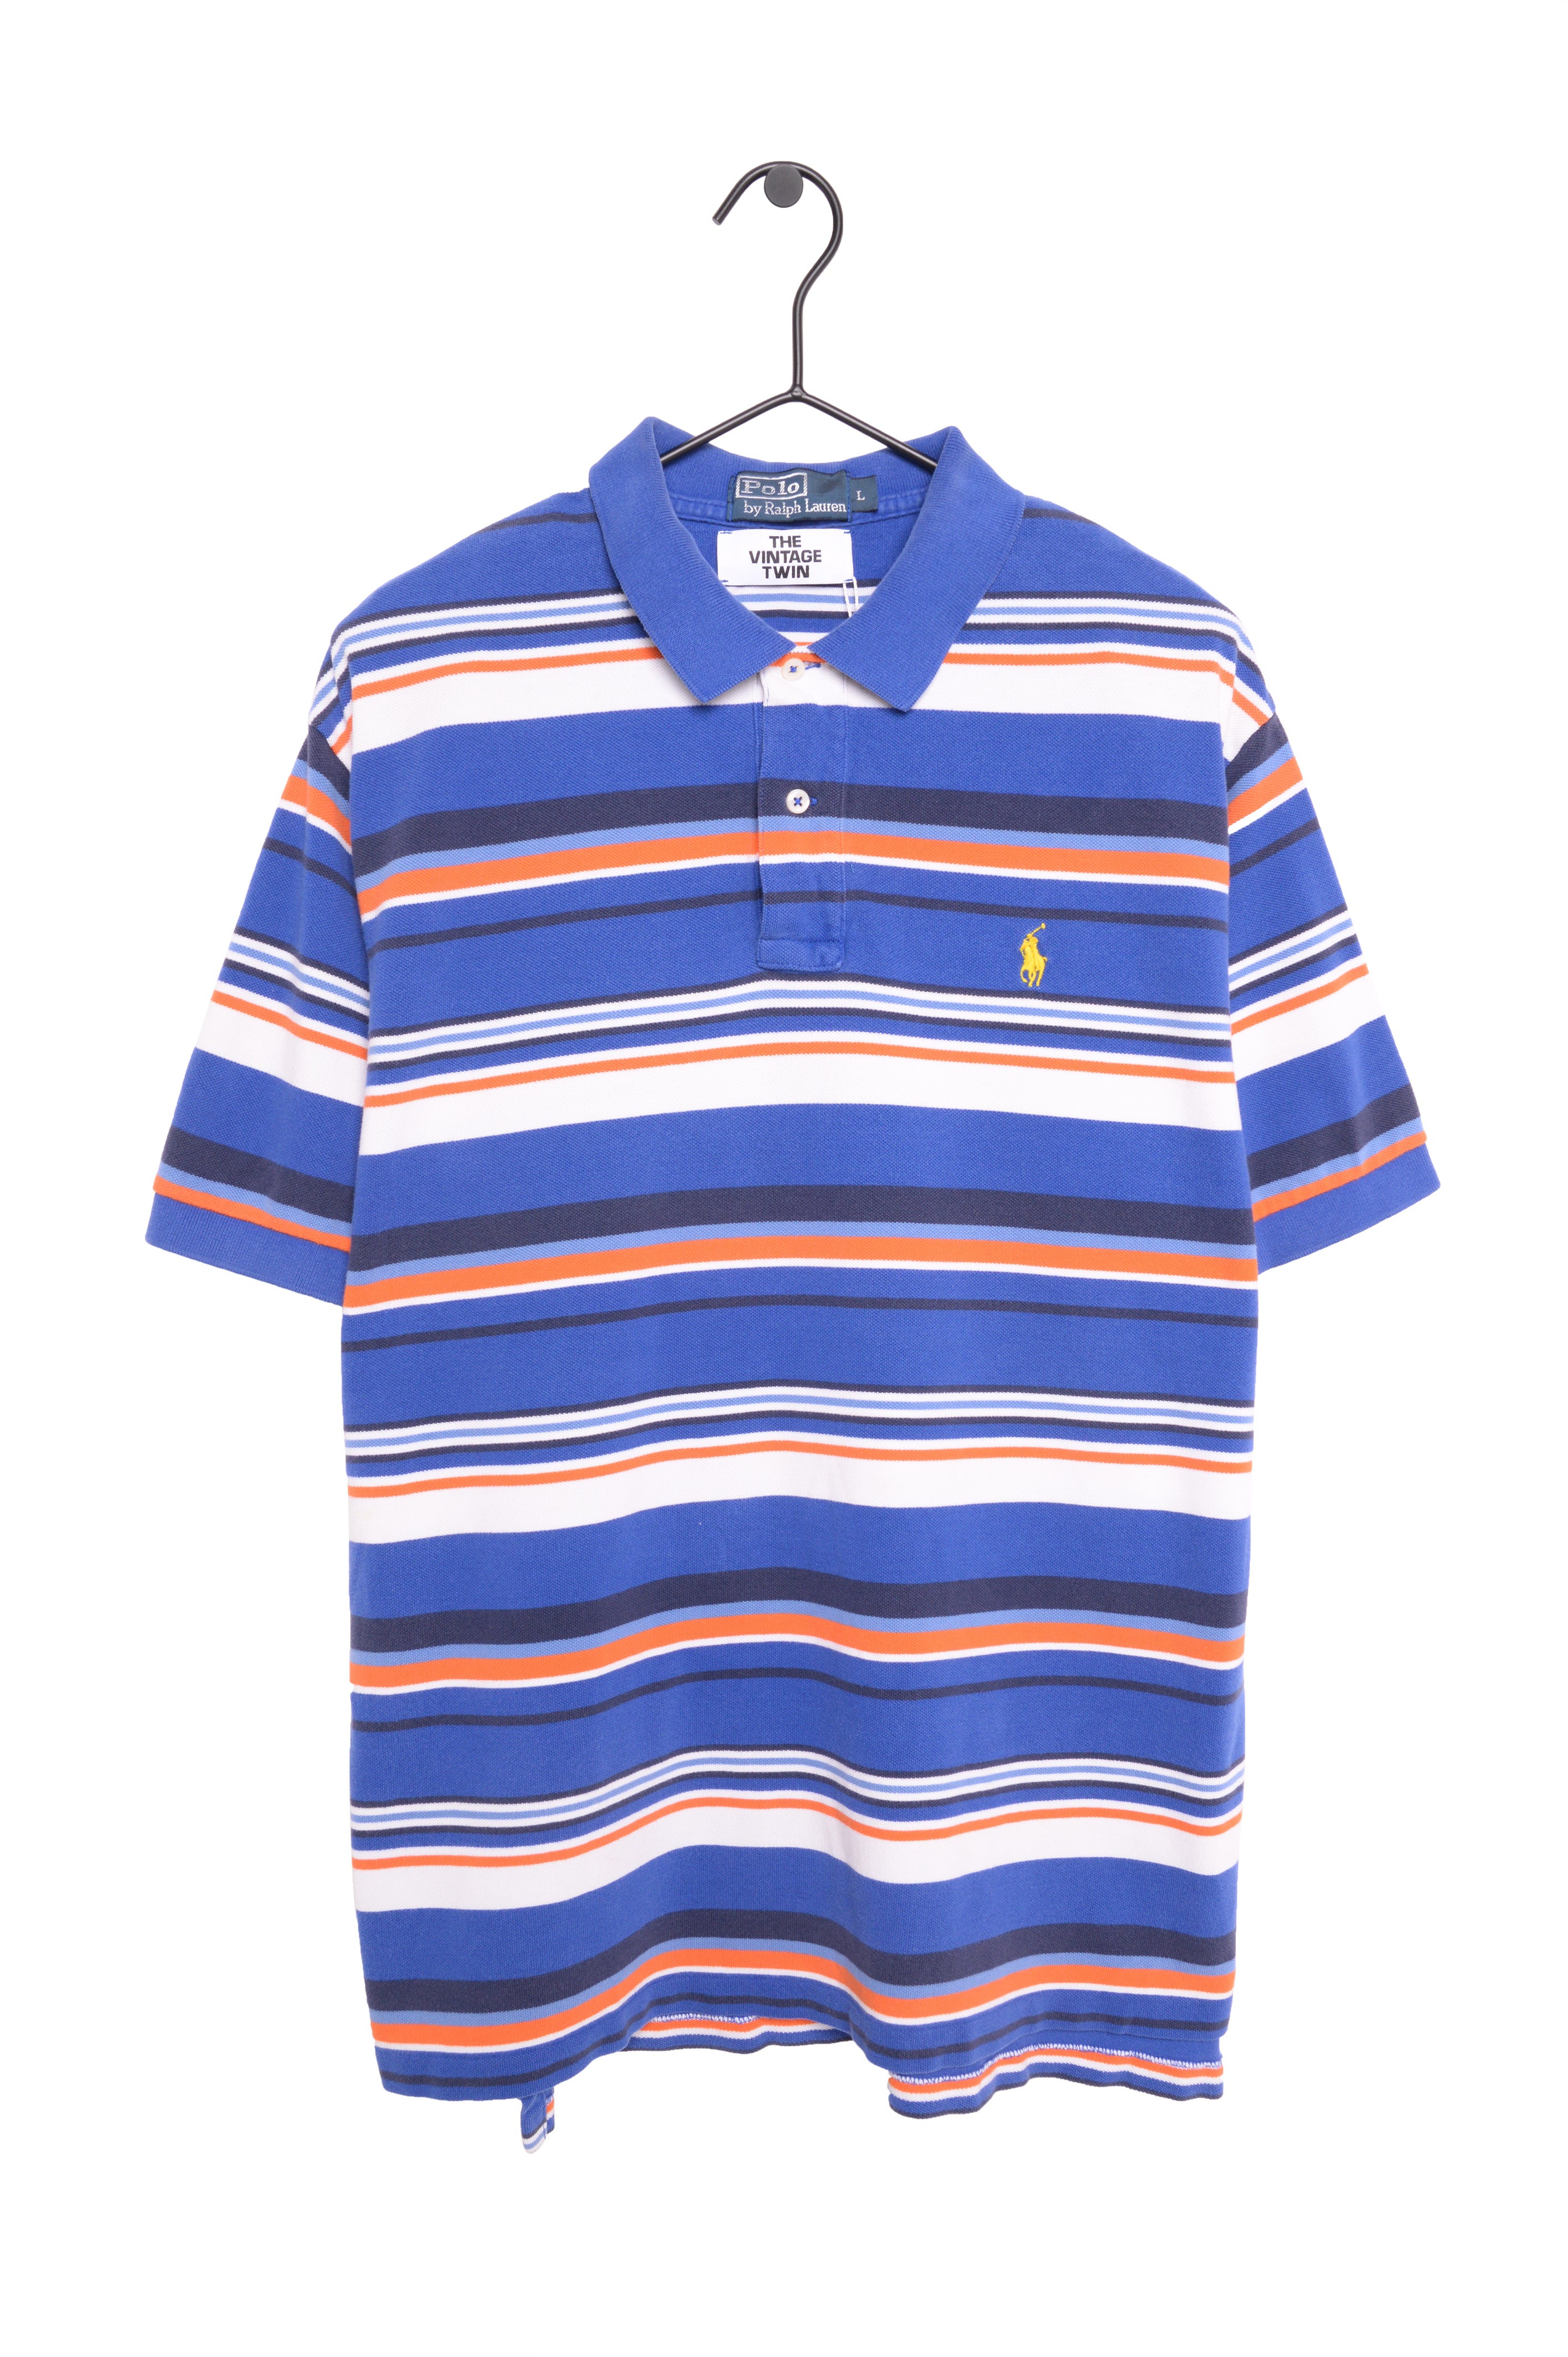 Ralph Lauren Striped Polo – The Vintage Twin